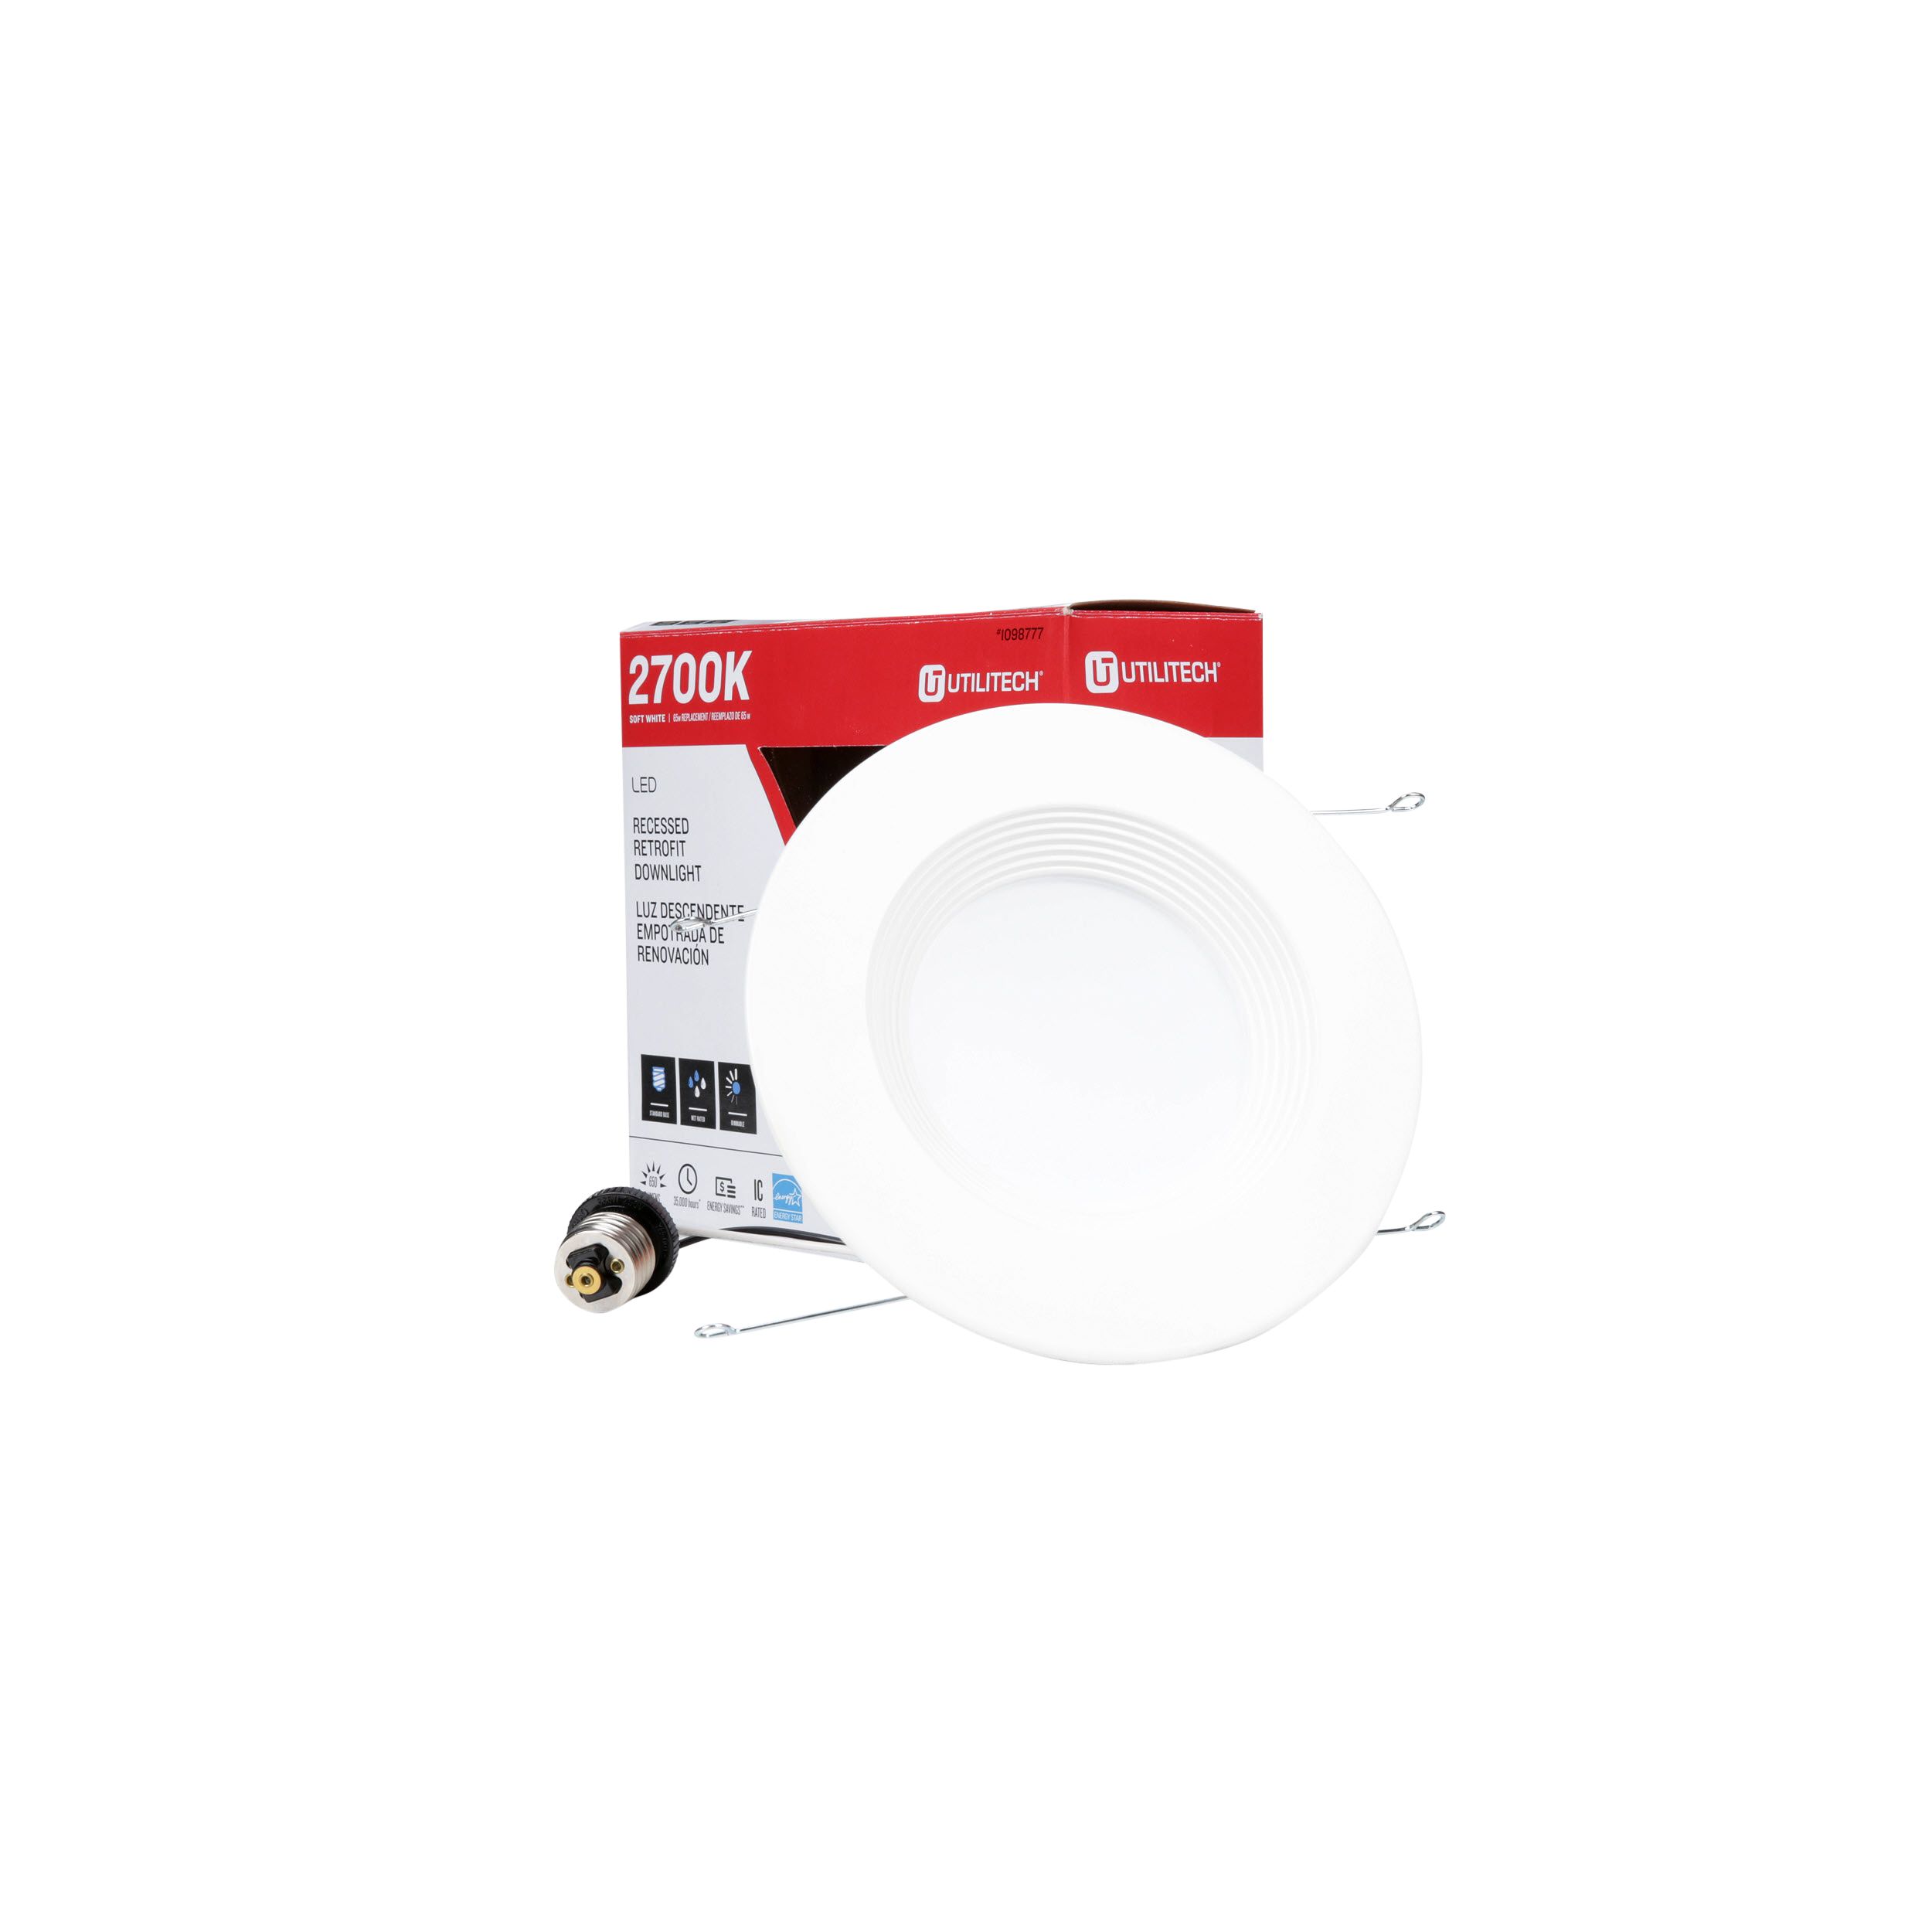 Utilitech LED 2700k Soft White 65w Eqv Round Dimmable Recessed Downlight 1098777 for sale online 